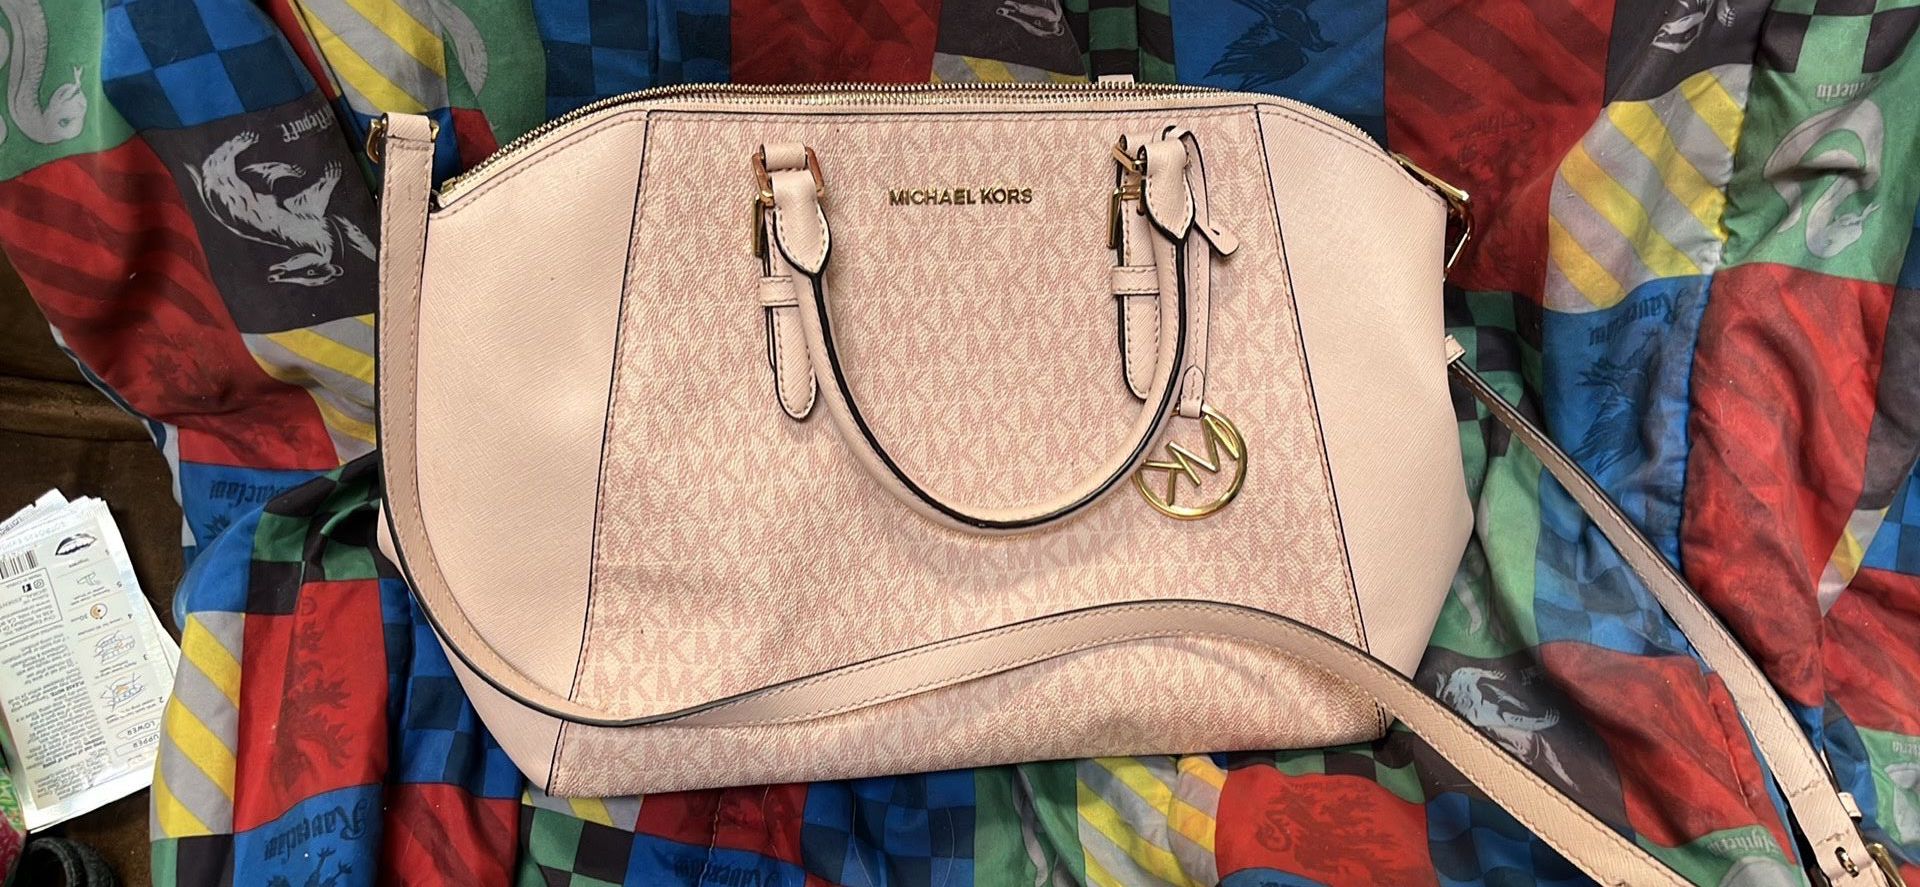 Good Used Condition Michael kors Pink Purse 